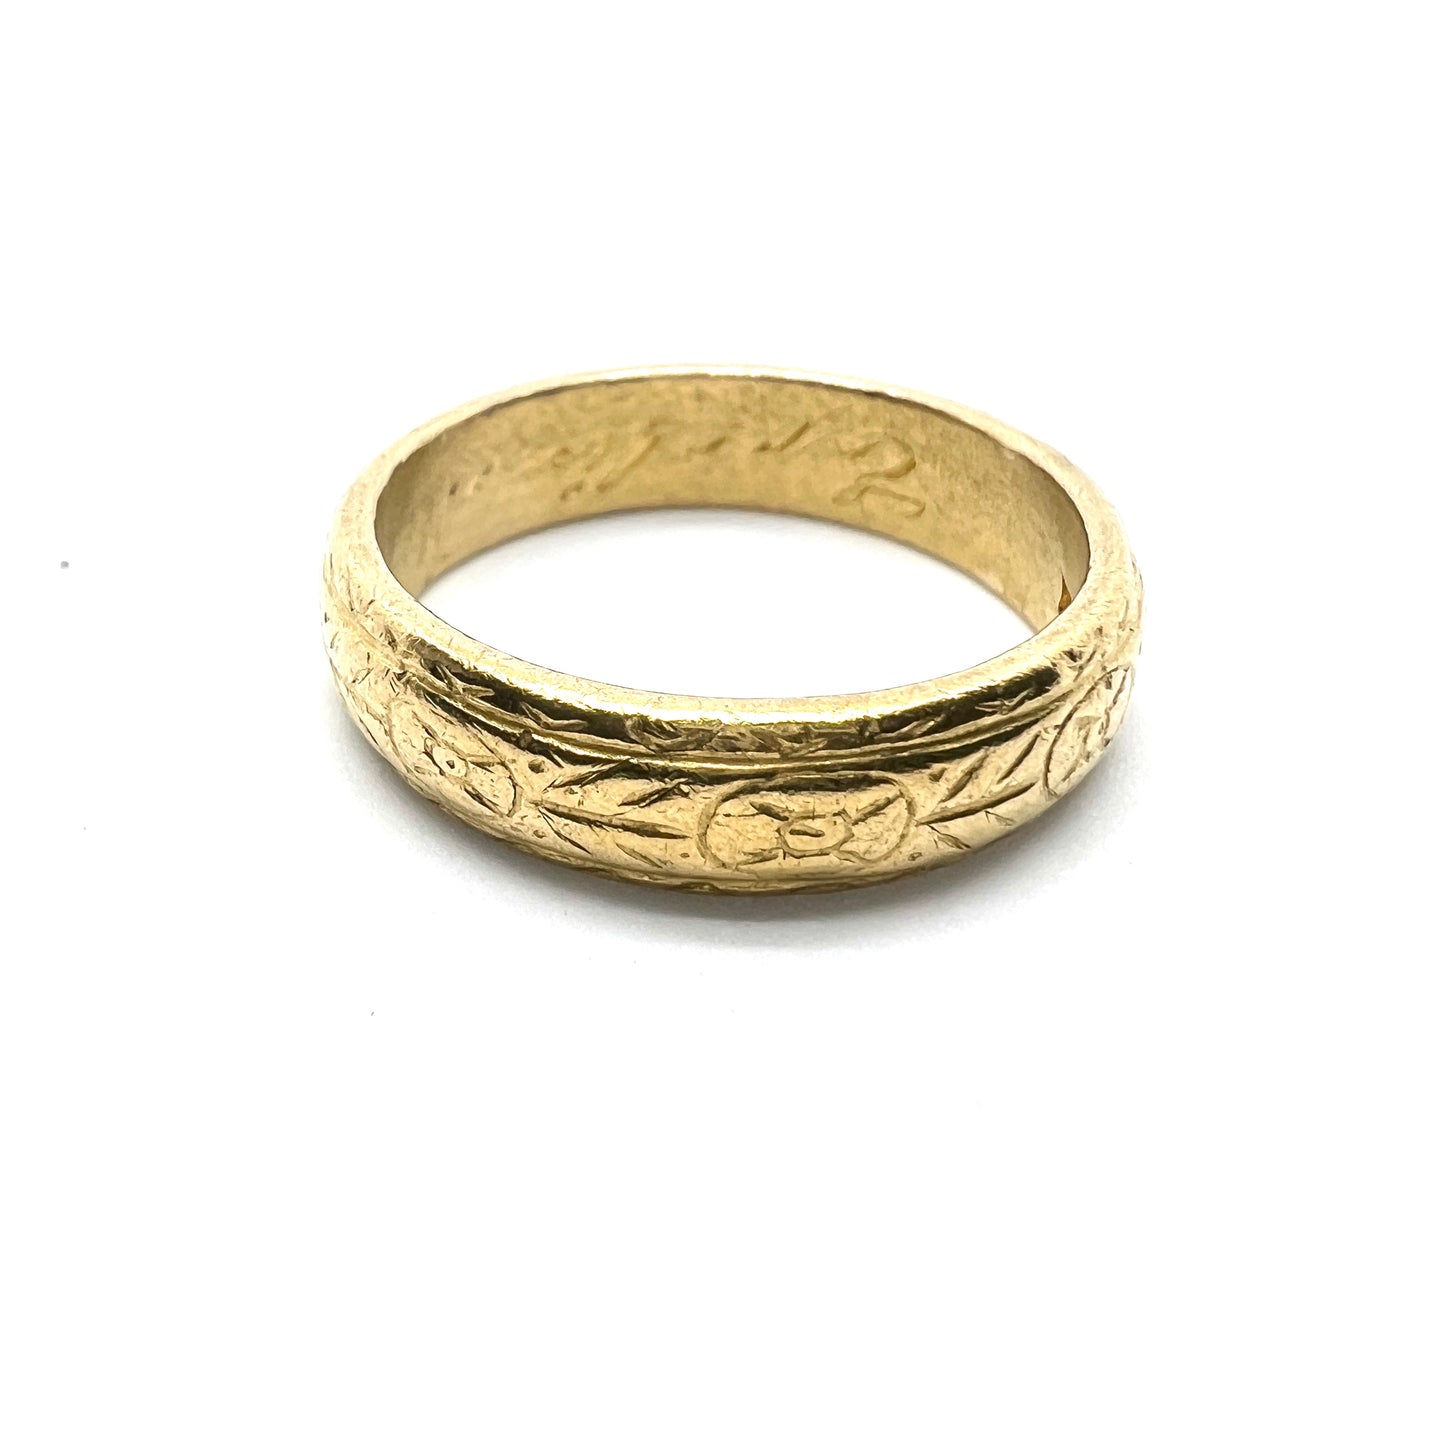 Sweden year 1913. Antique Chunky 23K Gold Men's Wedding Band Ring.